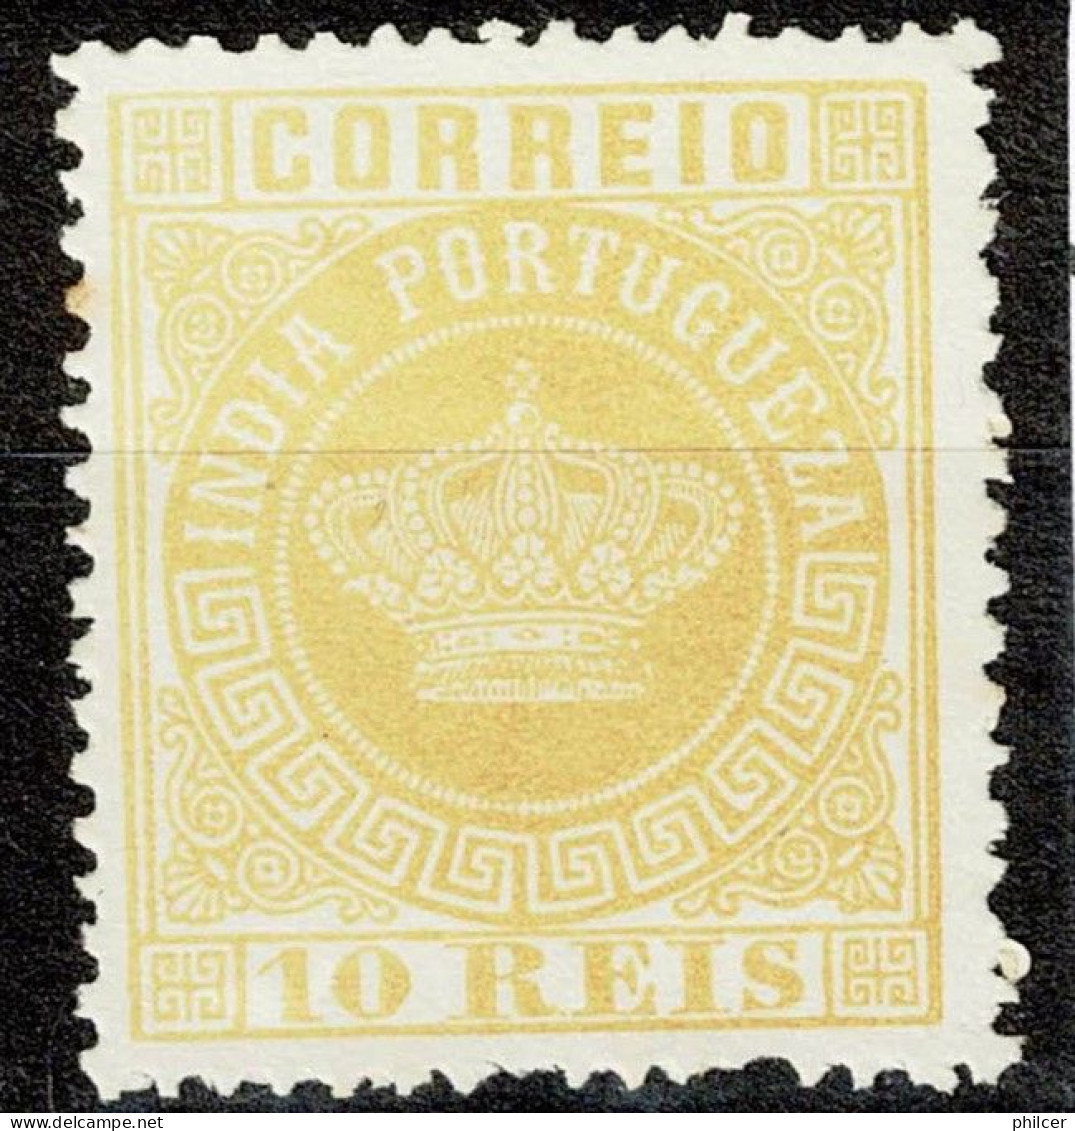 India, 1885, # 49, Reprint, MNG - Inde Portugaise